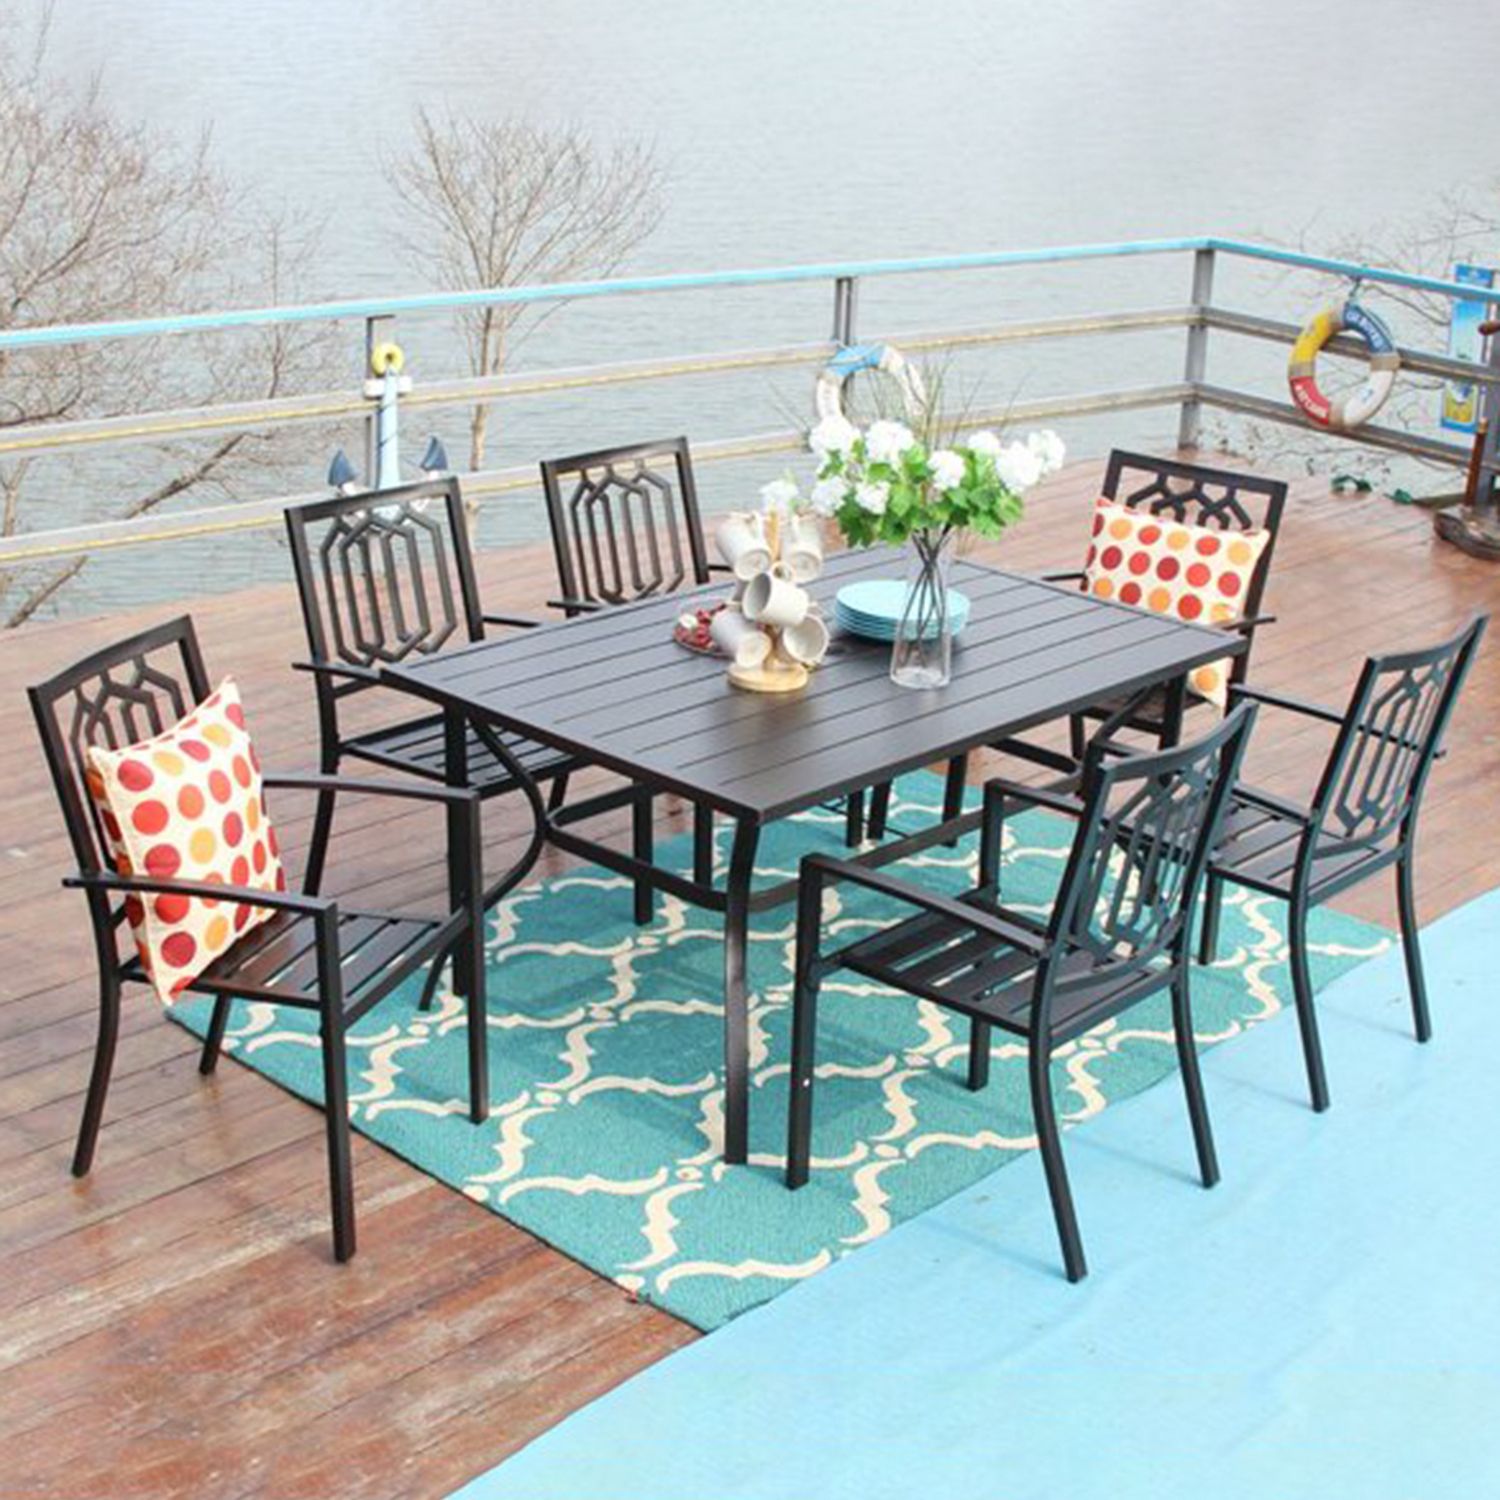 Most Popular Mf Studio 7pcs Outdoor Dining Sets Metal Patio Furniture With 6pcs Throughout Black Medium Rectangle Patio Dining Sets (View 10 of 15)